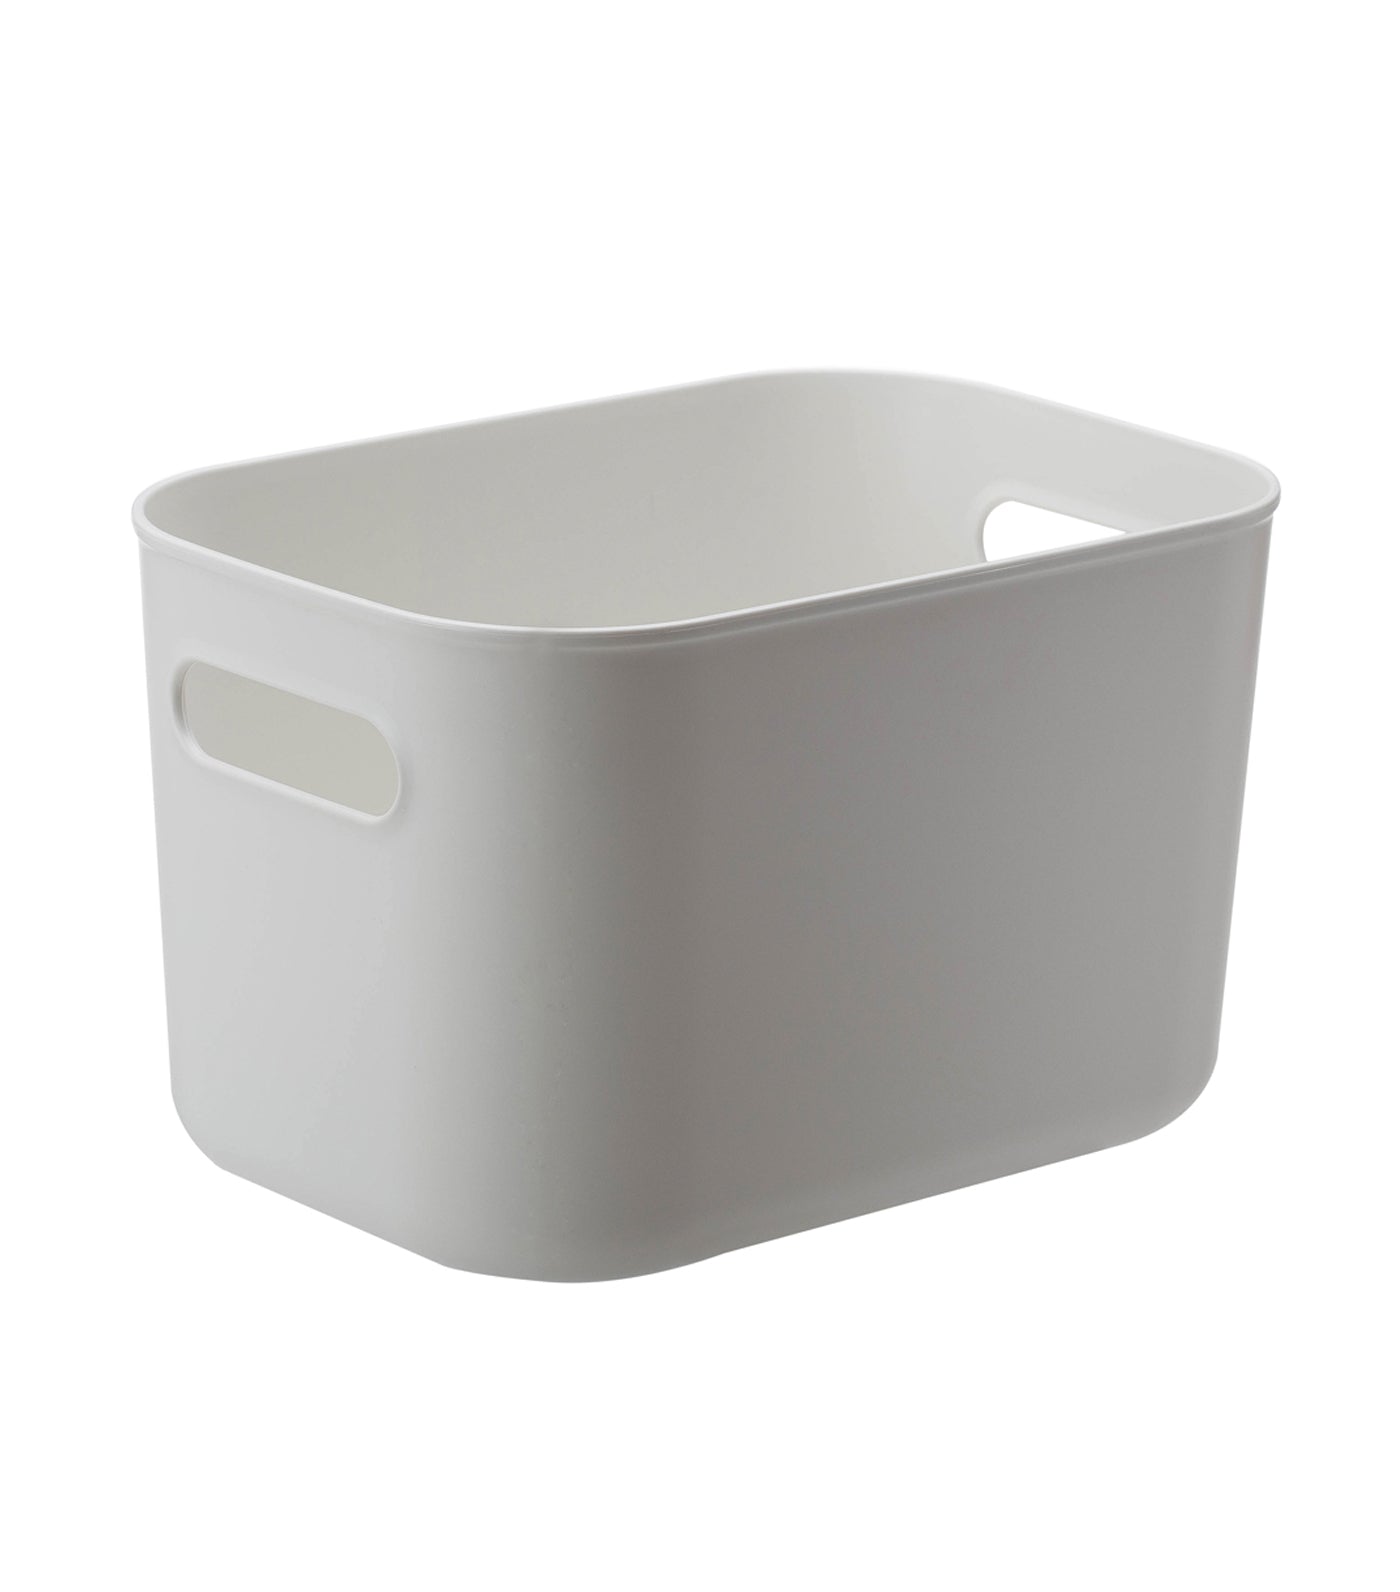 MakeRoom Storage Box Without Lid - Gray 